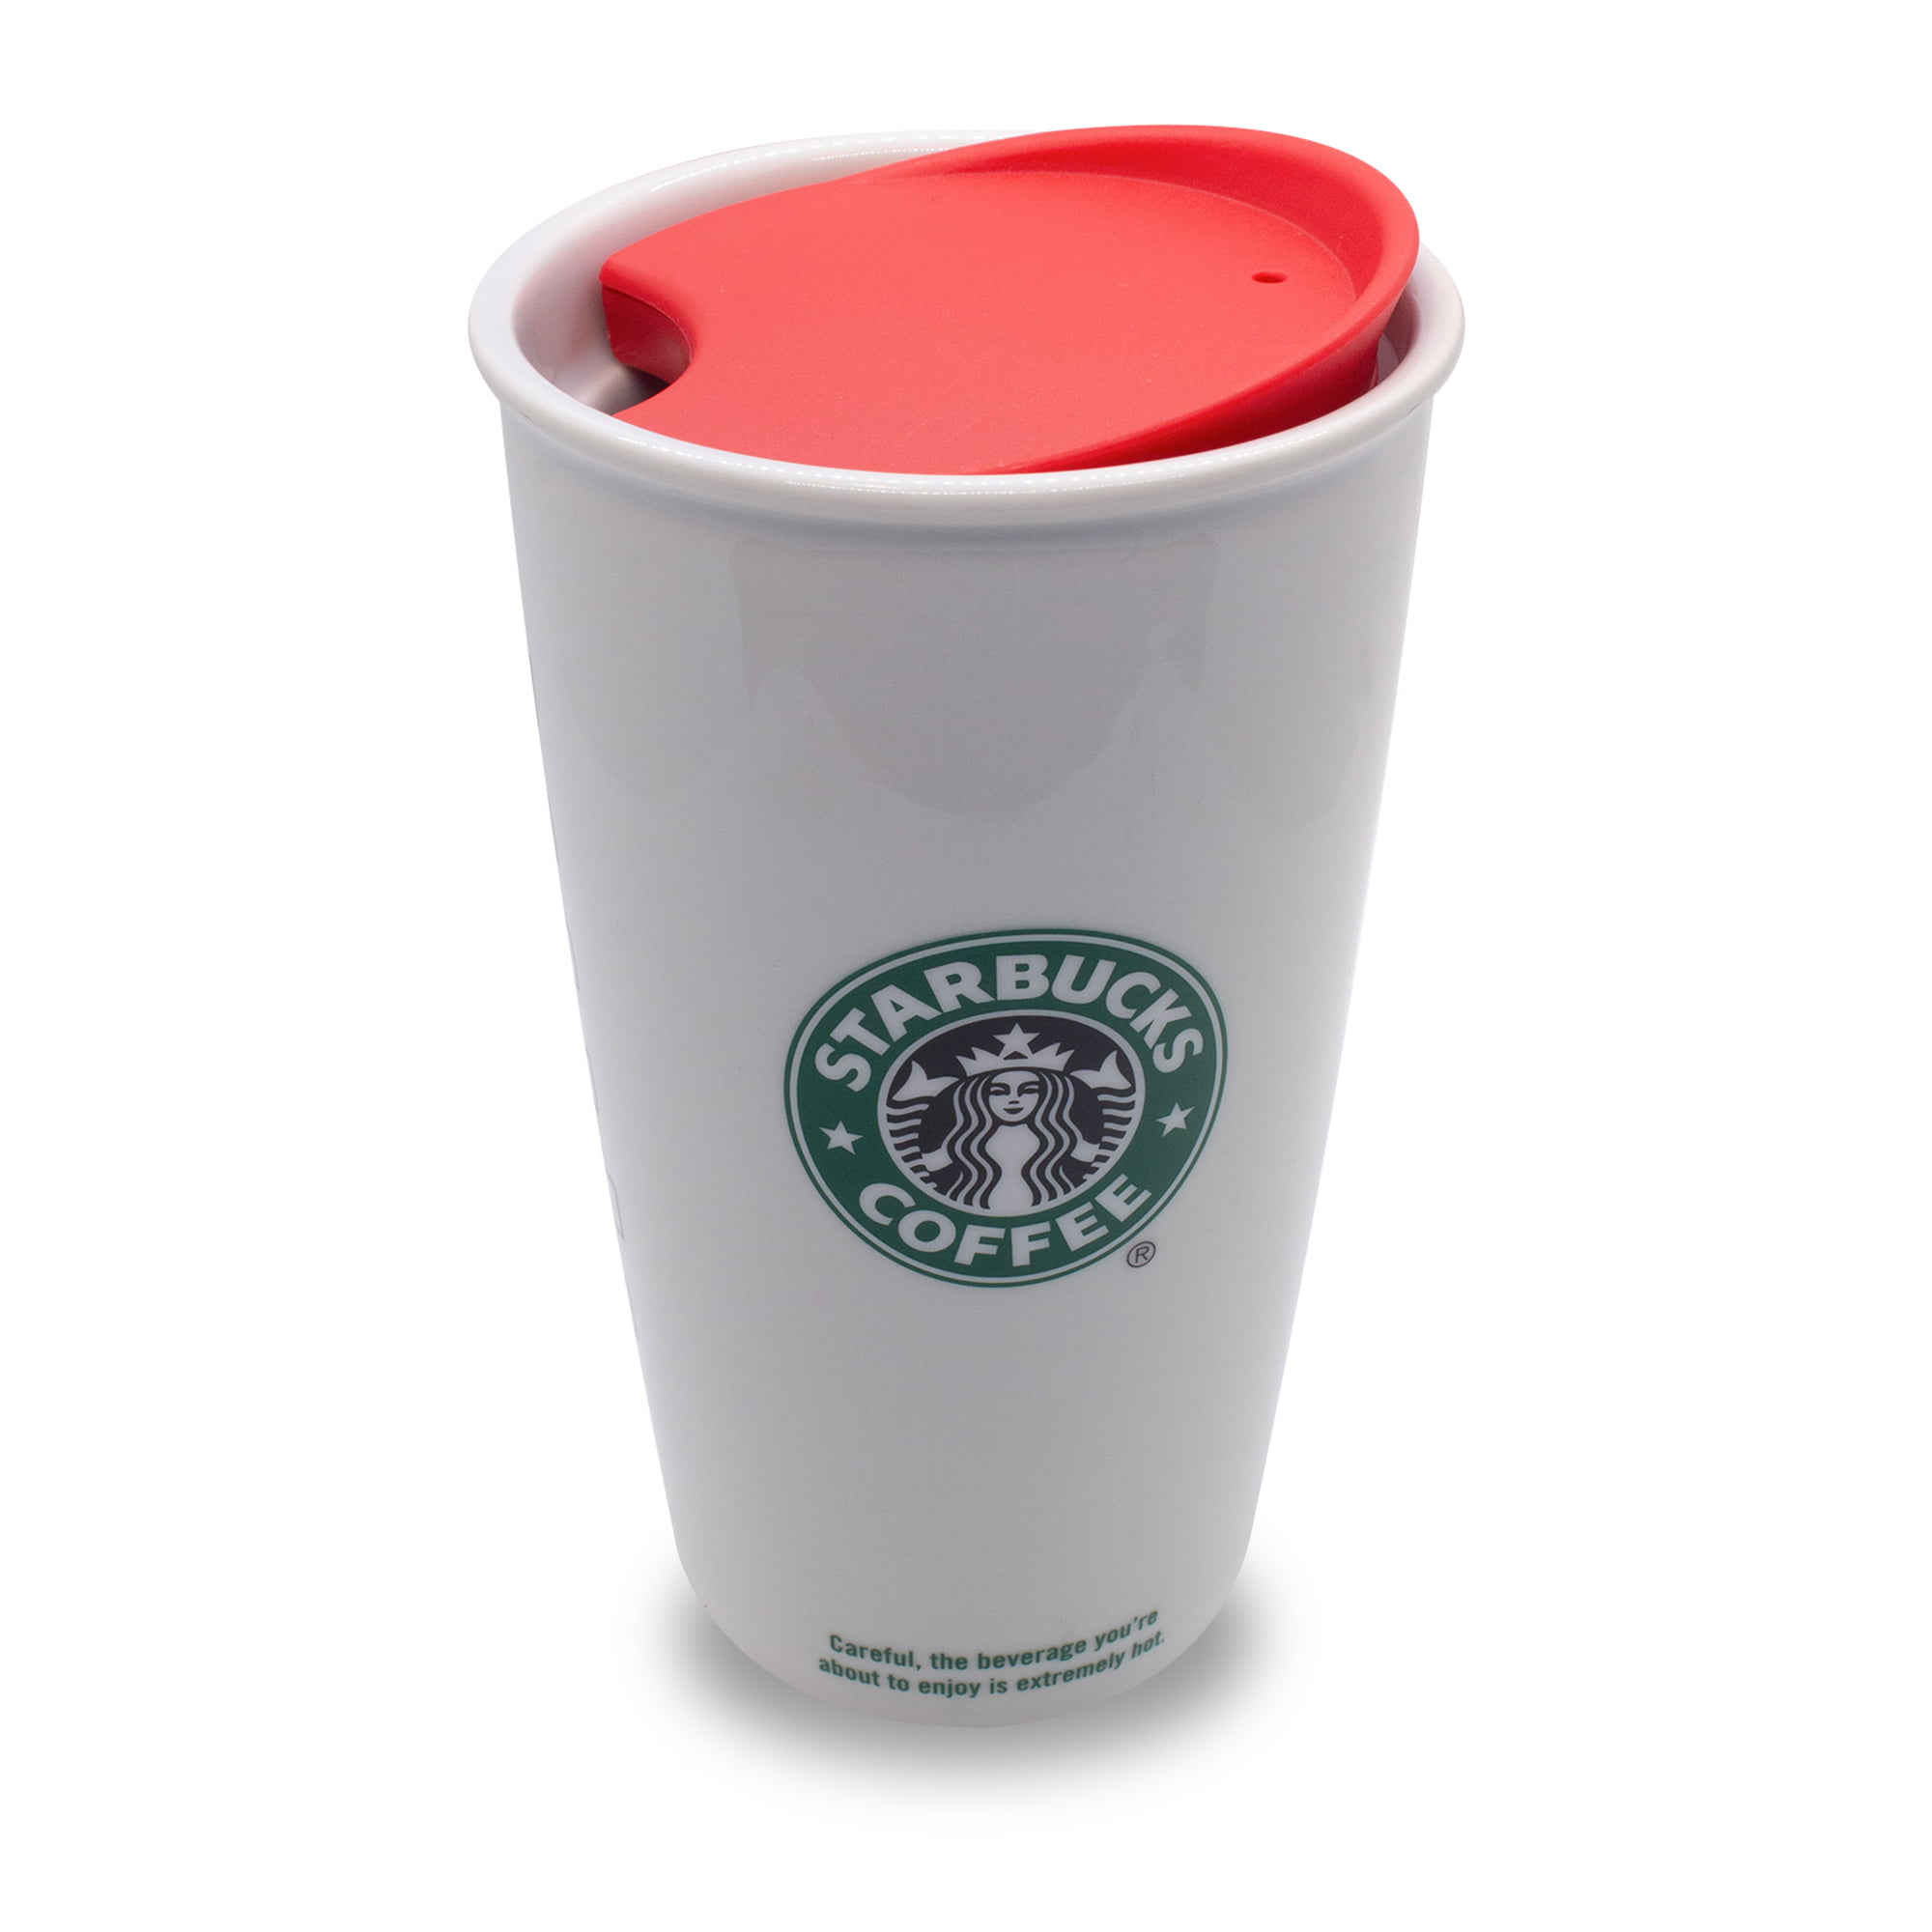 Panda Lid for Cups and Mugs, Silicone, Red - Merae